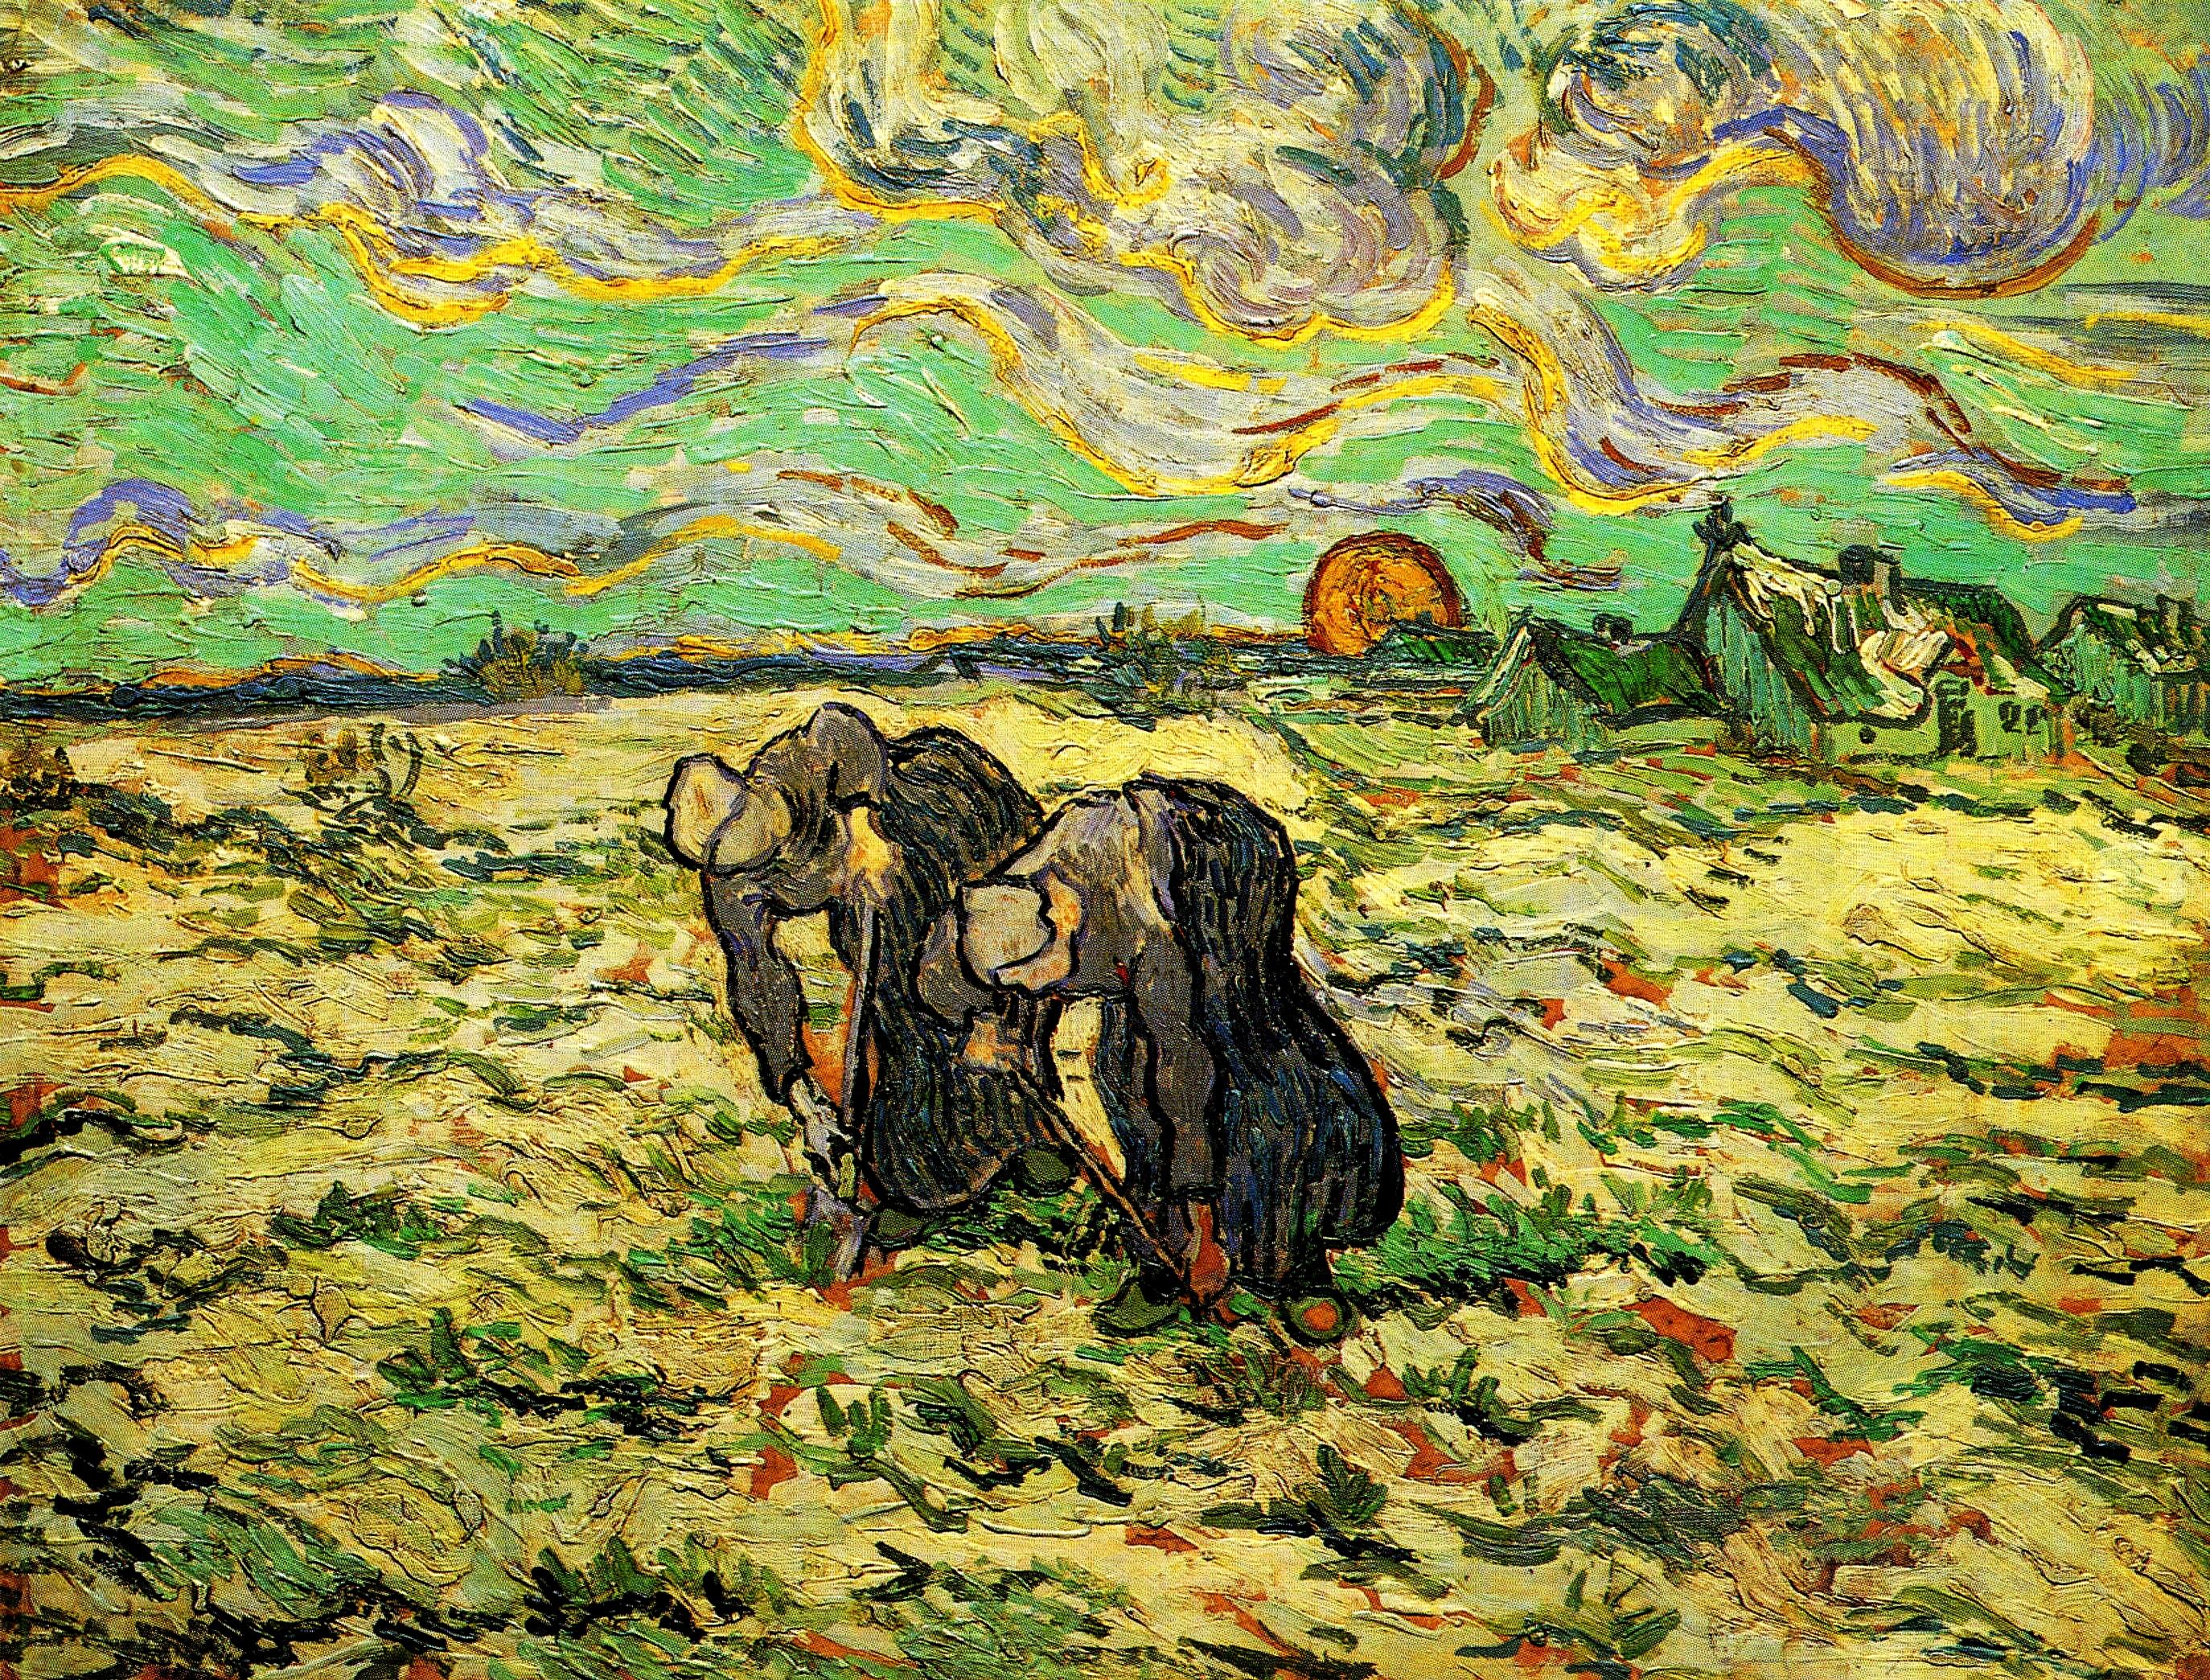 Two Peasant Women Digging in Field with Snow - Van Gogh Painting On Canvas